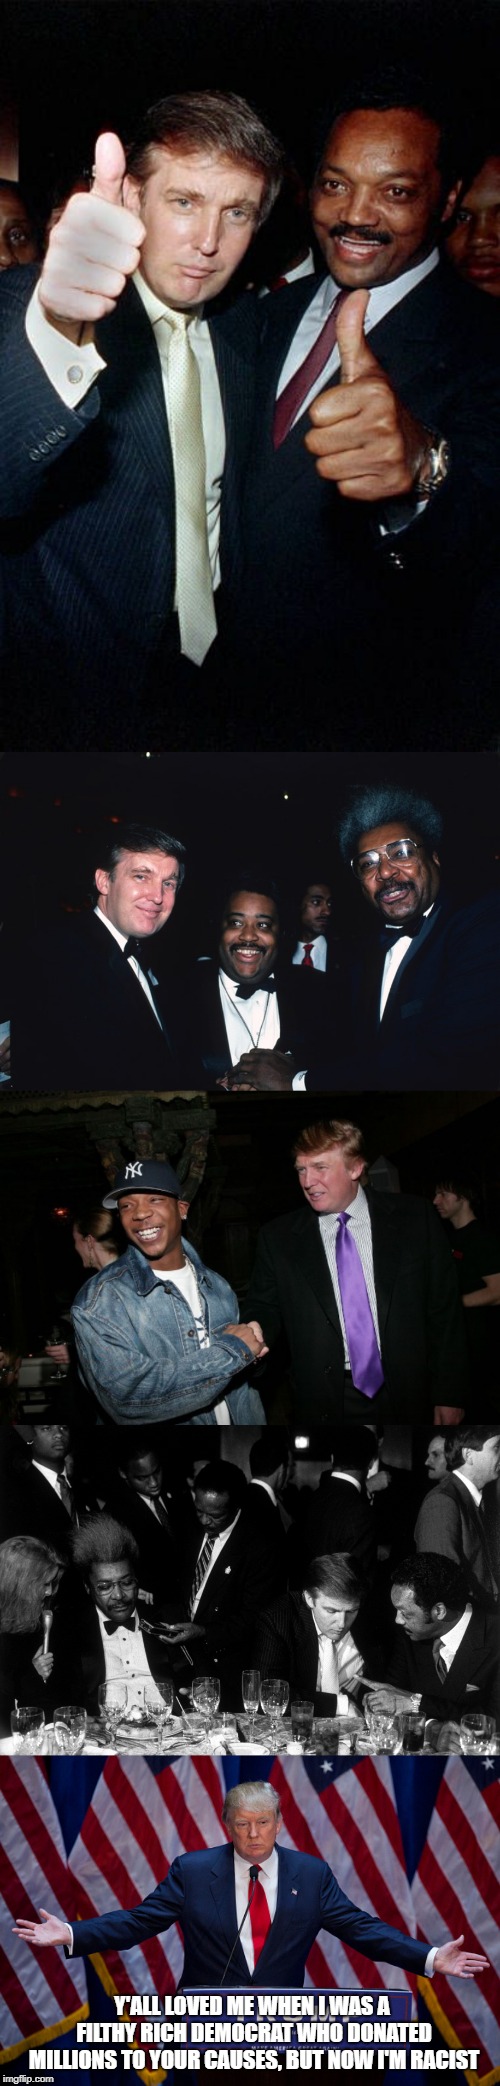 Remember when Donald Trump was a democrat and he was praised by black leaders for his support of diversity? | Y'ALL LOVED ME WHEN I WAS A FILTHY RICH DEMOCRAT WHO DONATED MILLIONS TO YOUR CAUSES, BUT NOW I'M RACIST | image tagged in donald trump,jesse jackson,al sharpton,don king,black leaders,racist | made w/ Imgflip meme maker